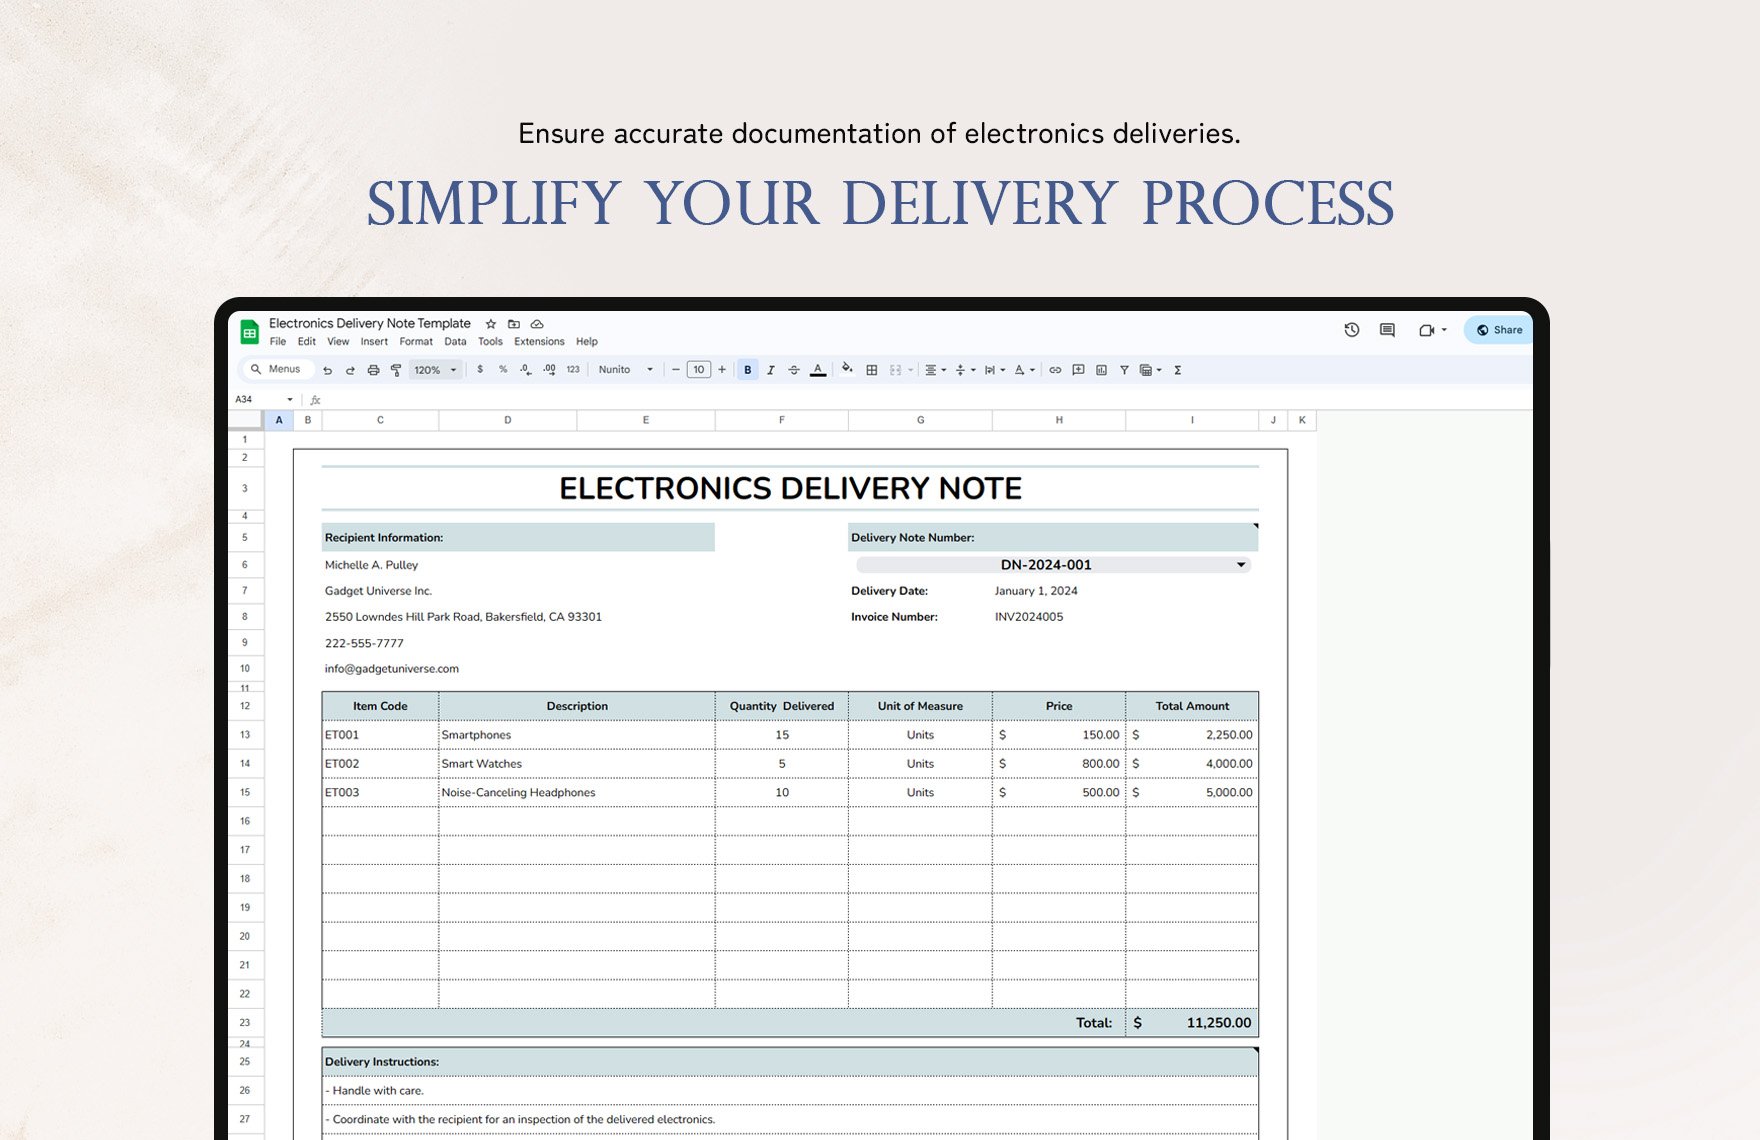 Electronics Delivery Note Template